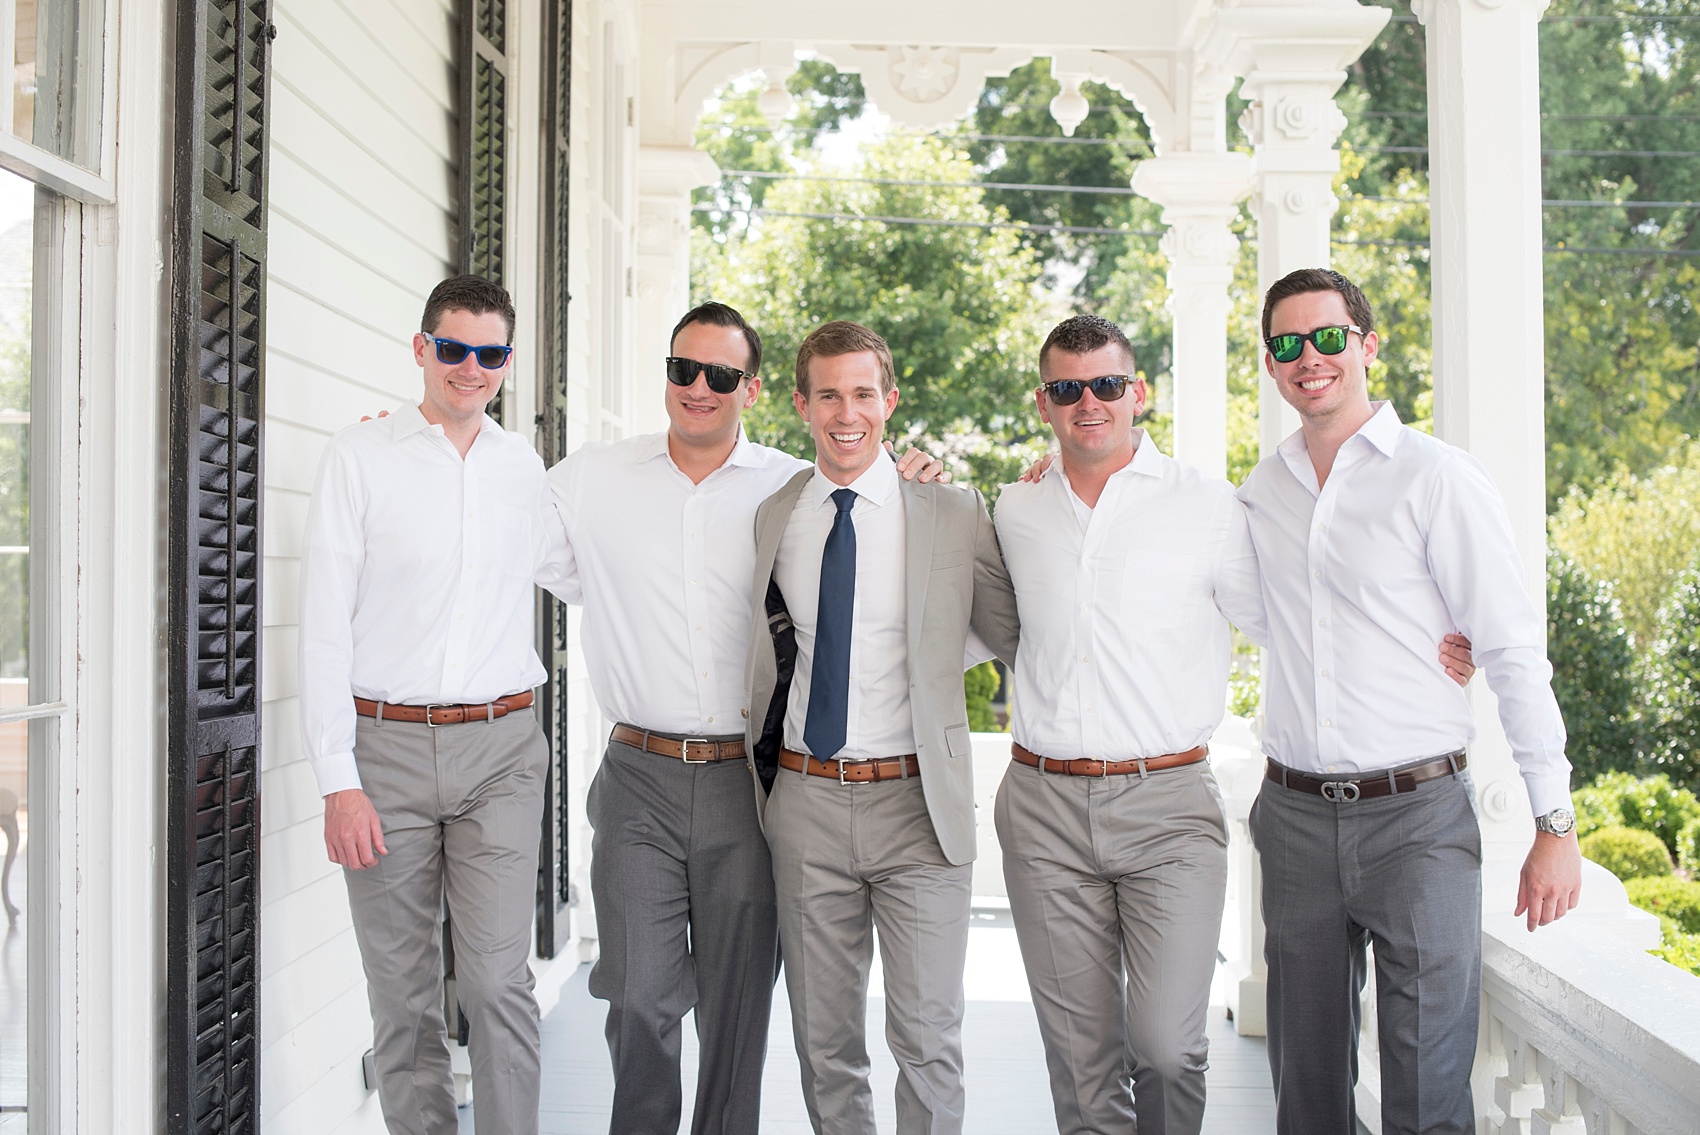 Mikkel Paige Photography photos of a wedding at The Merrimon-Wynne House in downtown Raleigh. The groomsmen!